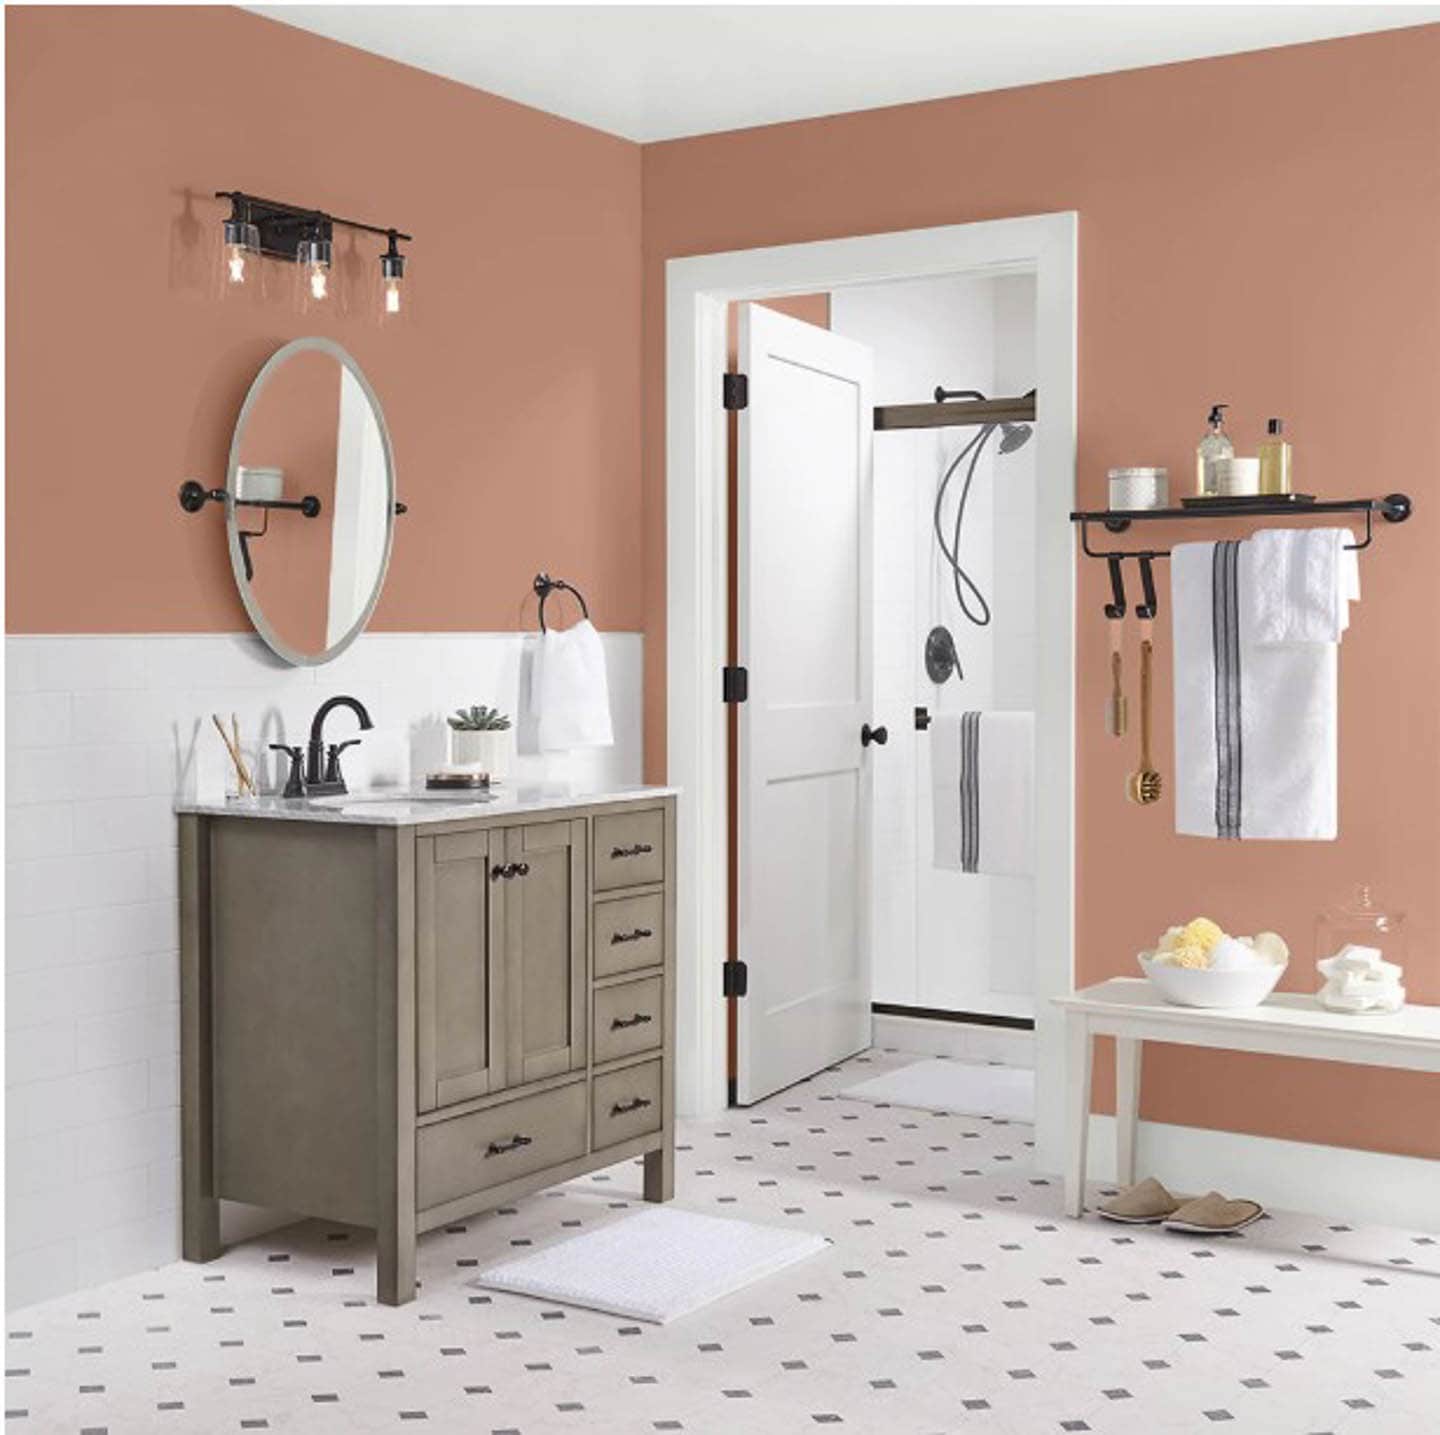 Bathroom painted in Better Homes and Gardens 2023 paint color of the year - Canyon Ridge